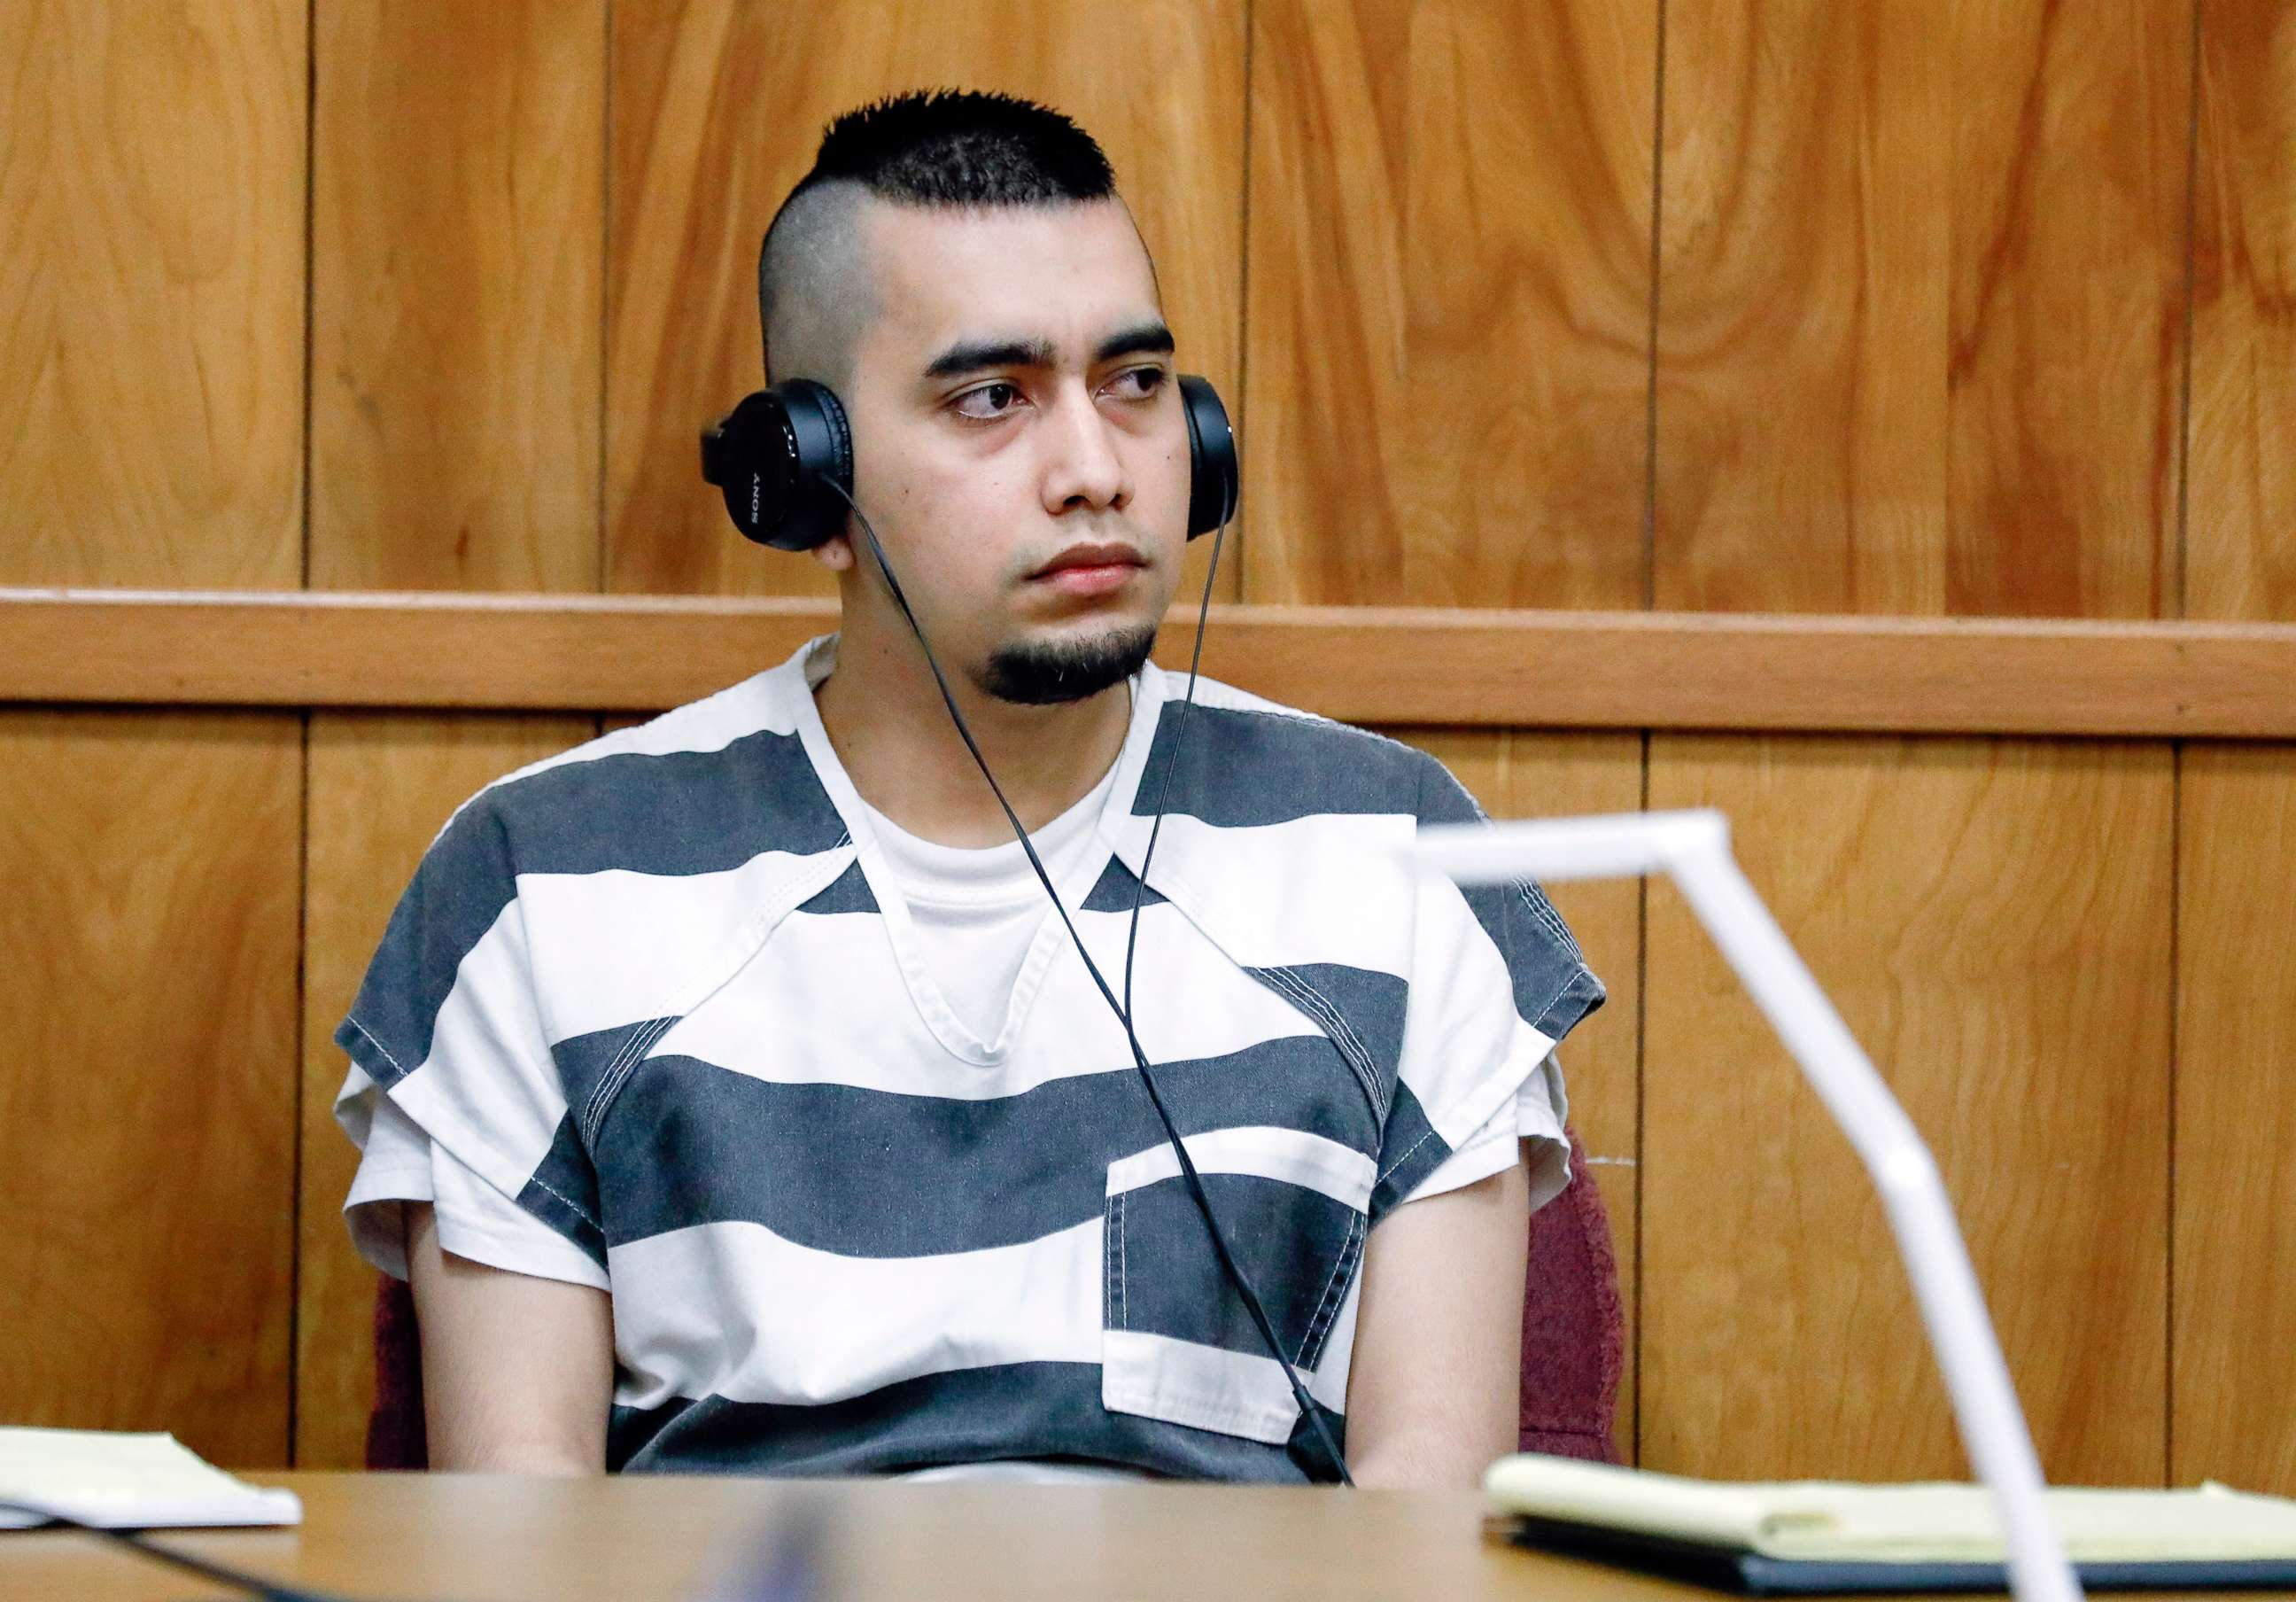 PHOTO: Cristhian Bahena Rivera appears during a hearing at the Poweshiek County Courthouse in Montezuma, Iowa, on July 15, 2021.